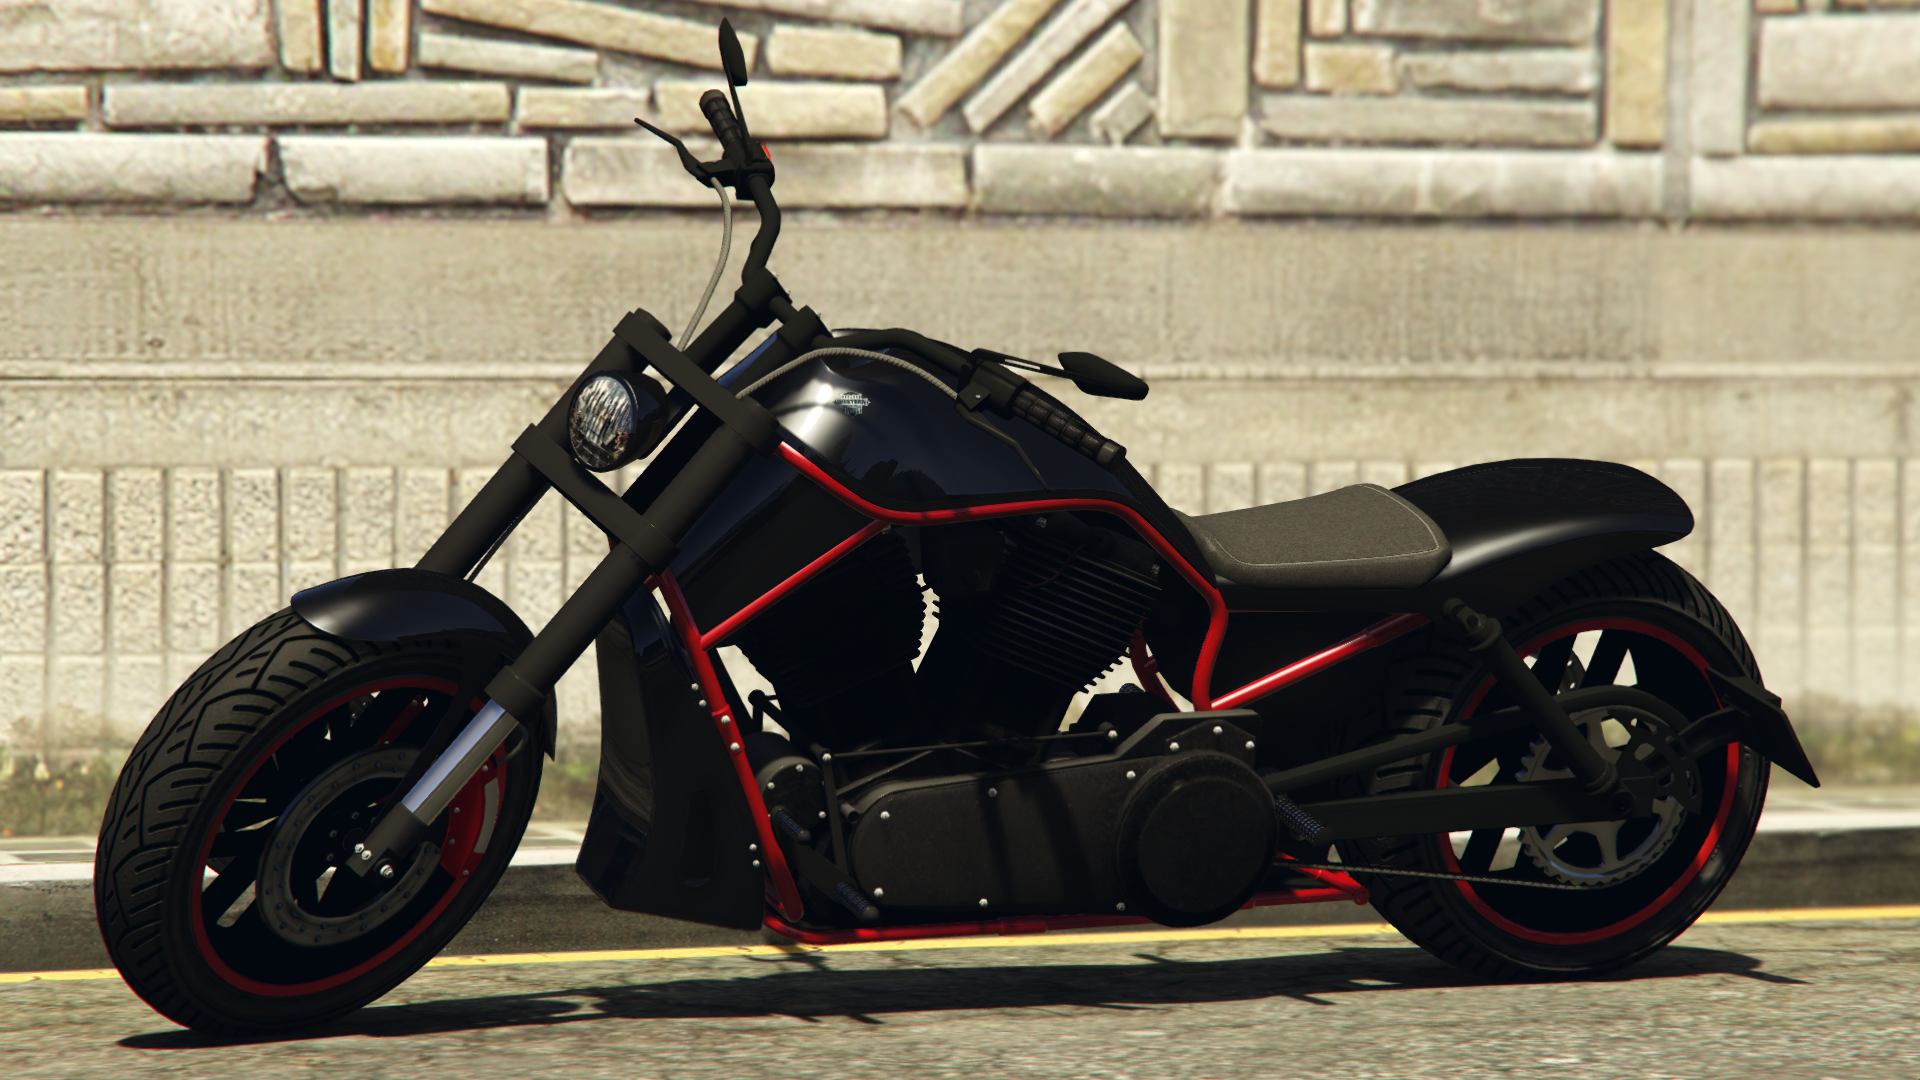 GTA 5 motorcycles - download motorbikes for GTA V — page 2